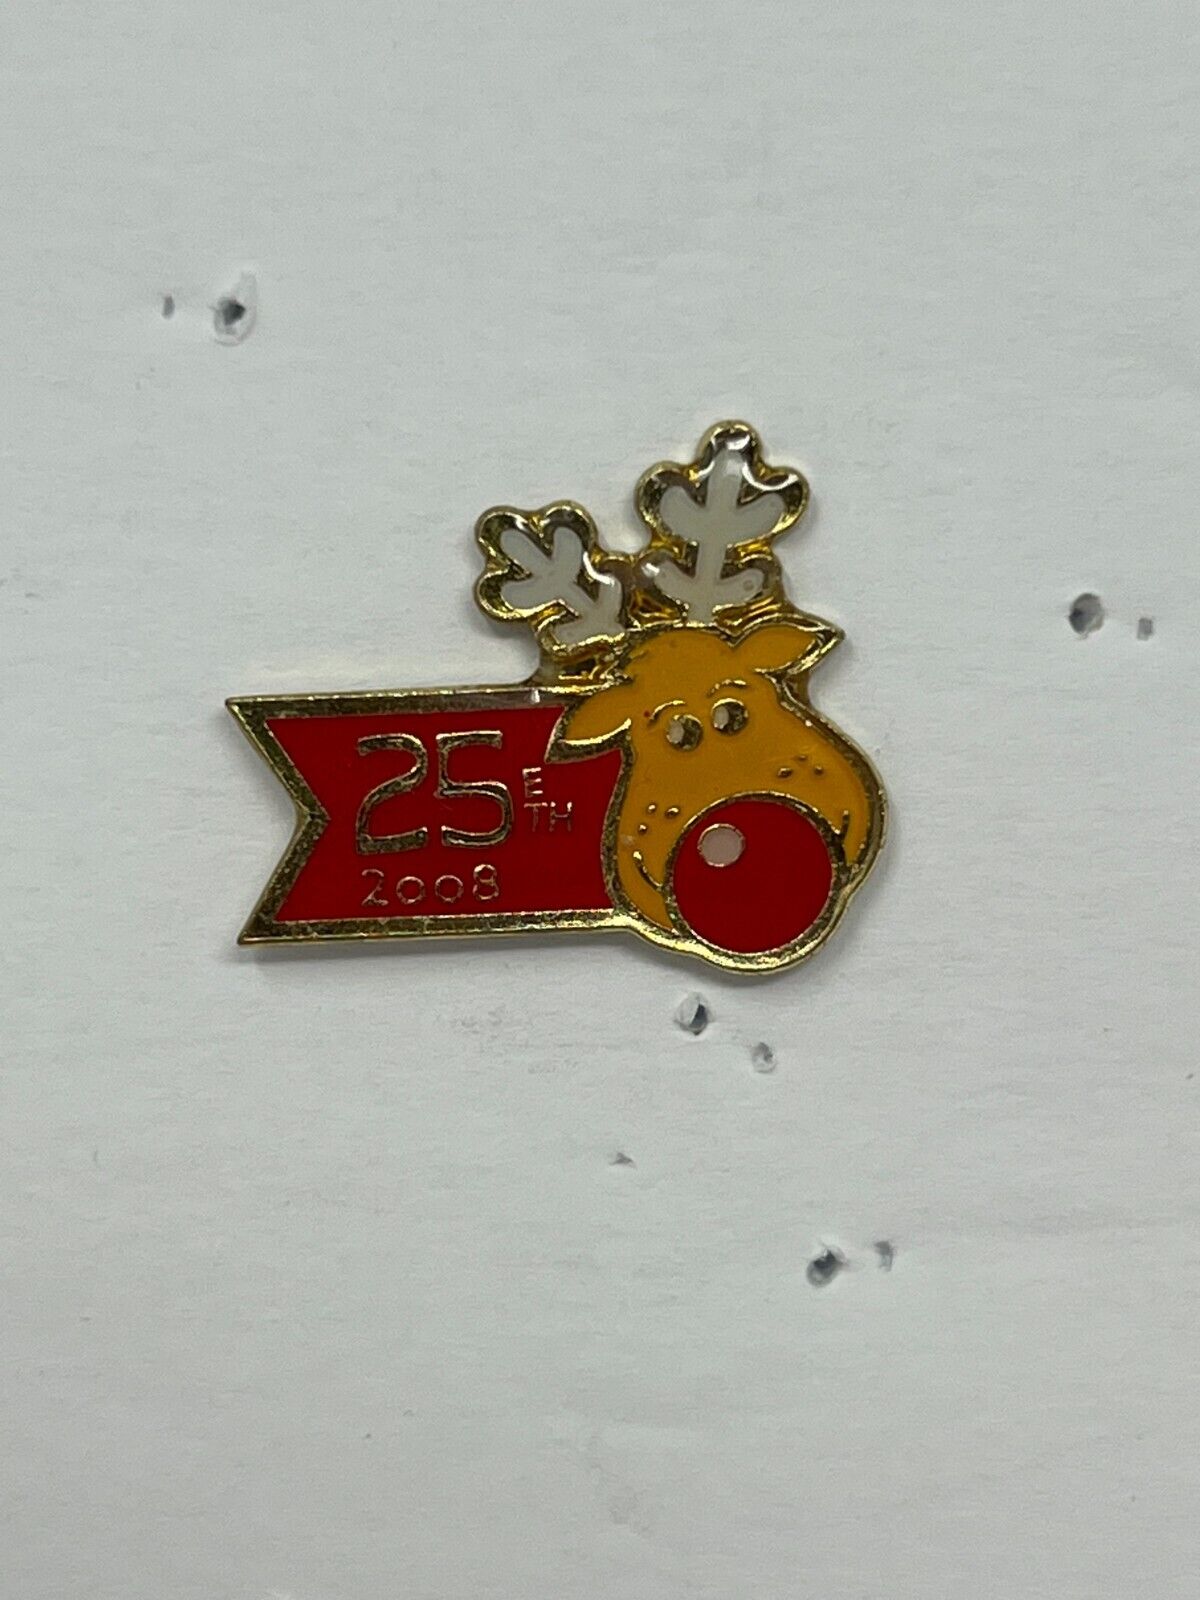 Rudolph the Red Nosed Reindeer 2008 Christmas Lapel Pin P2